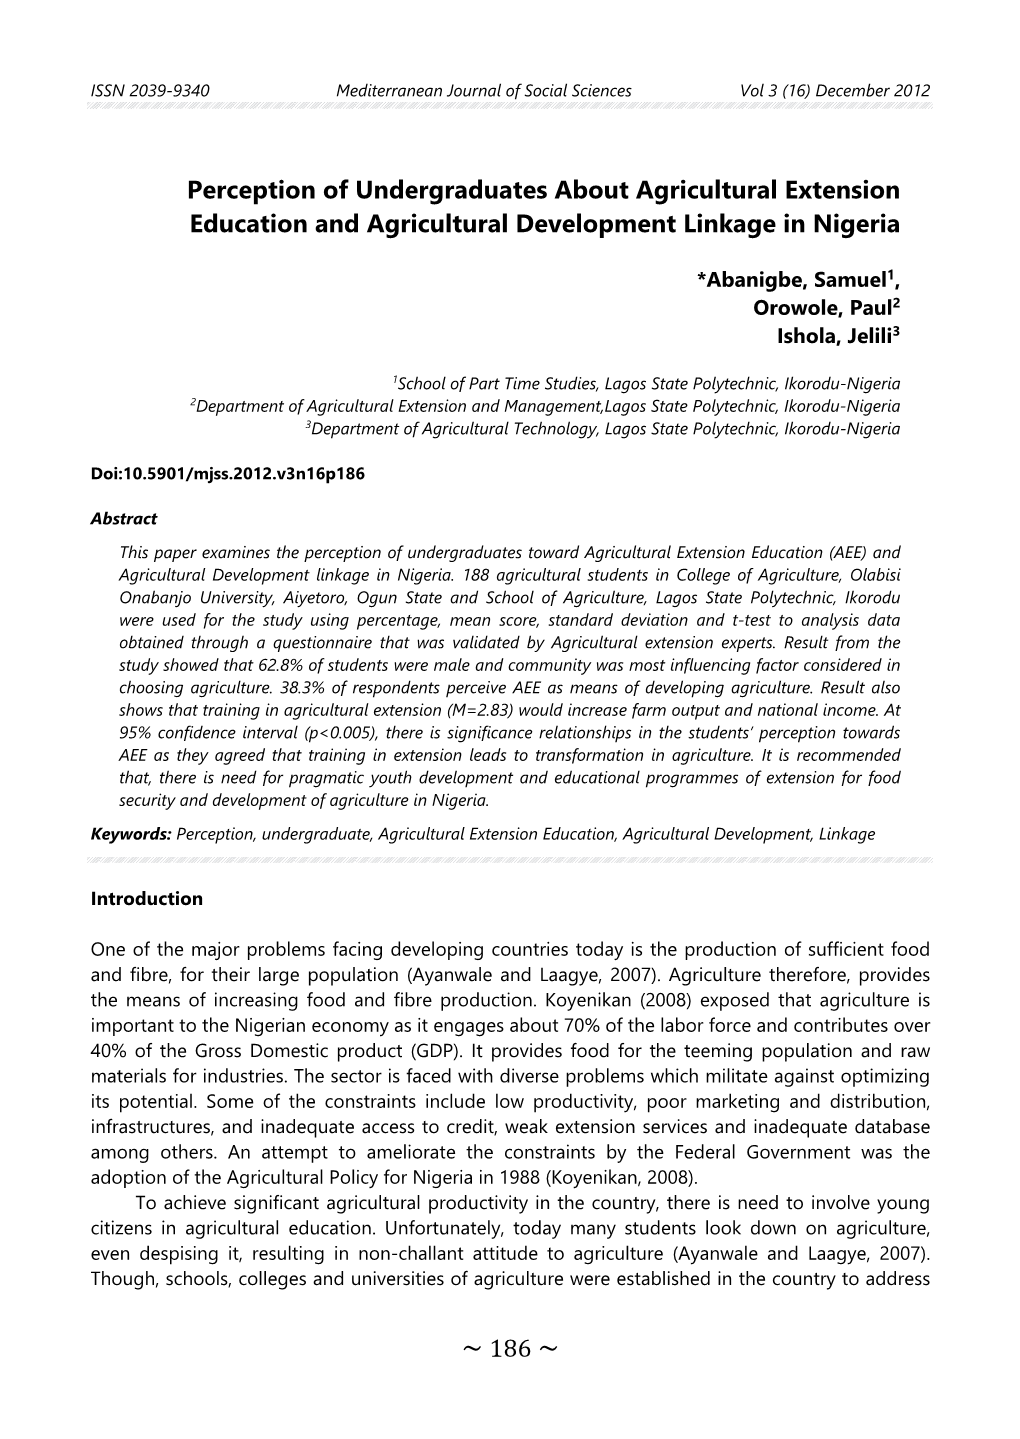 Perception of Undergraduates About Agricultural Extension Education and Agricultural Development Linkage in Nigeria